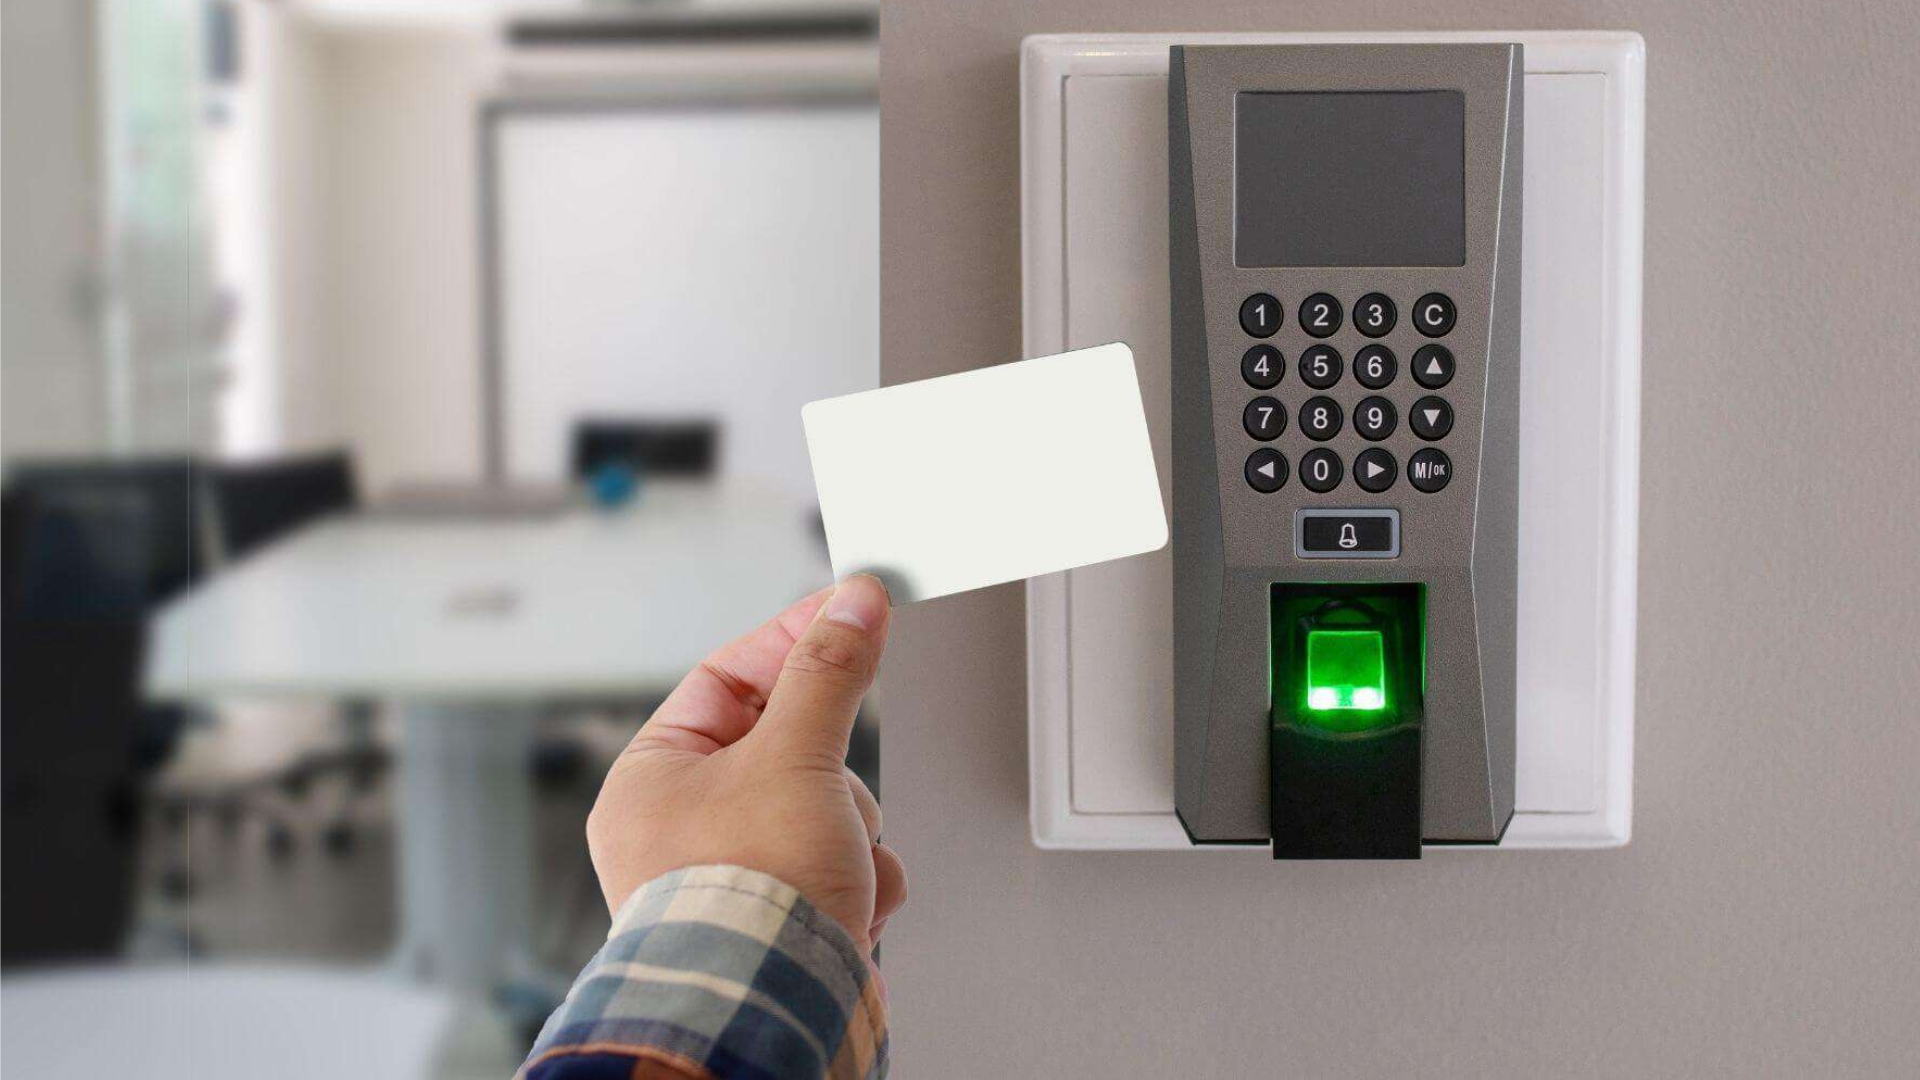 A user swiping their card on a reader. Electronic access control systems are a type of high-security locks.